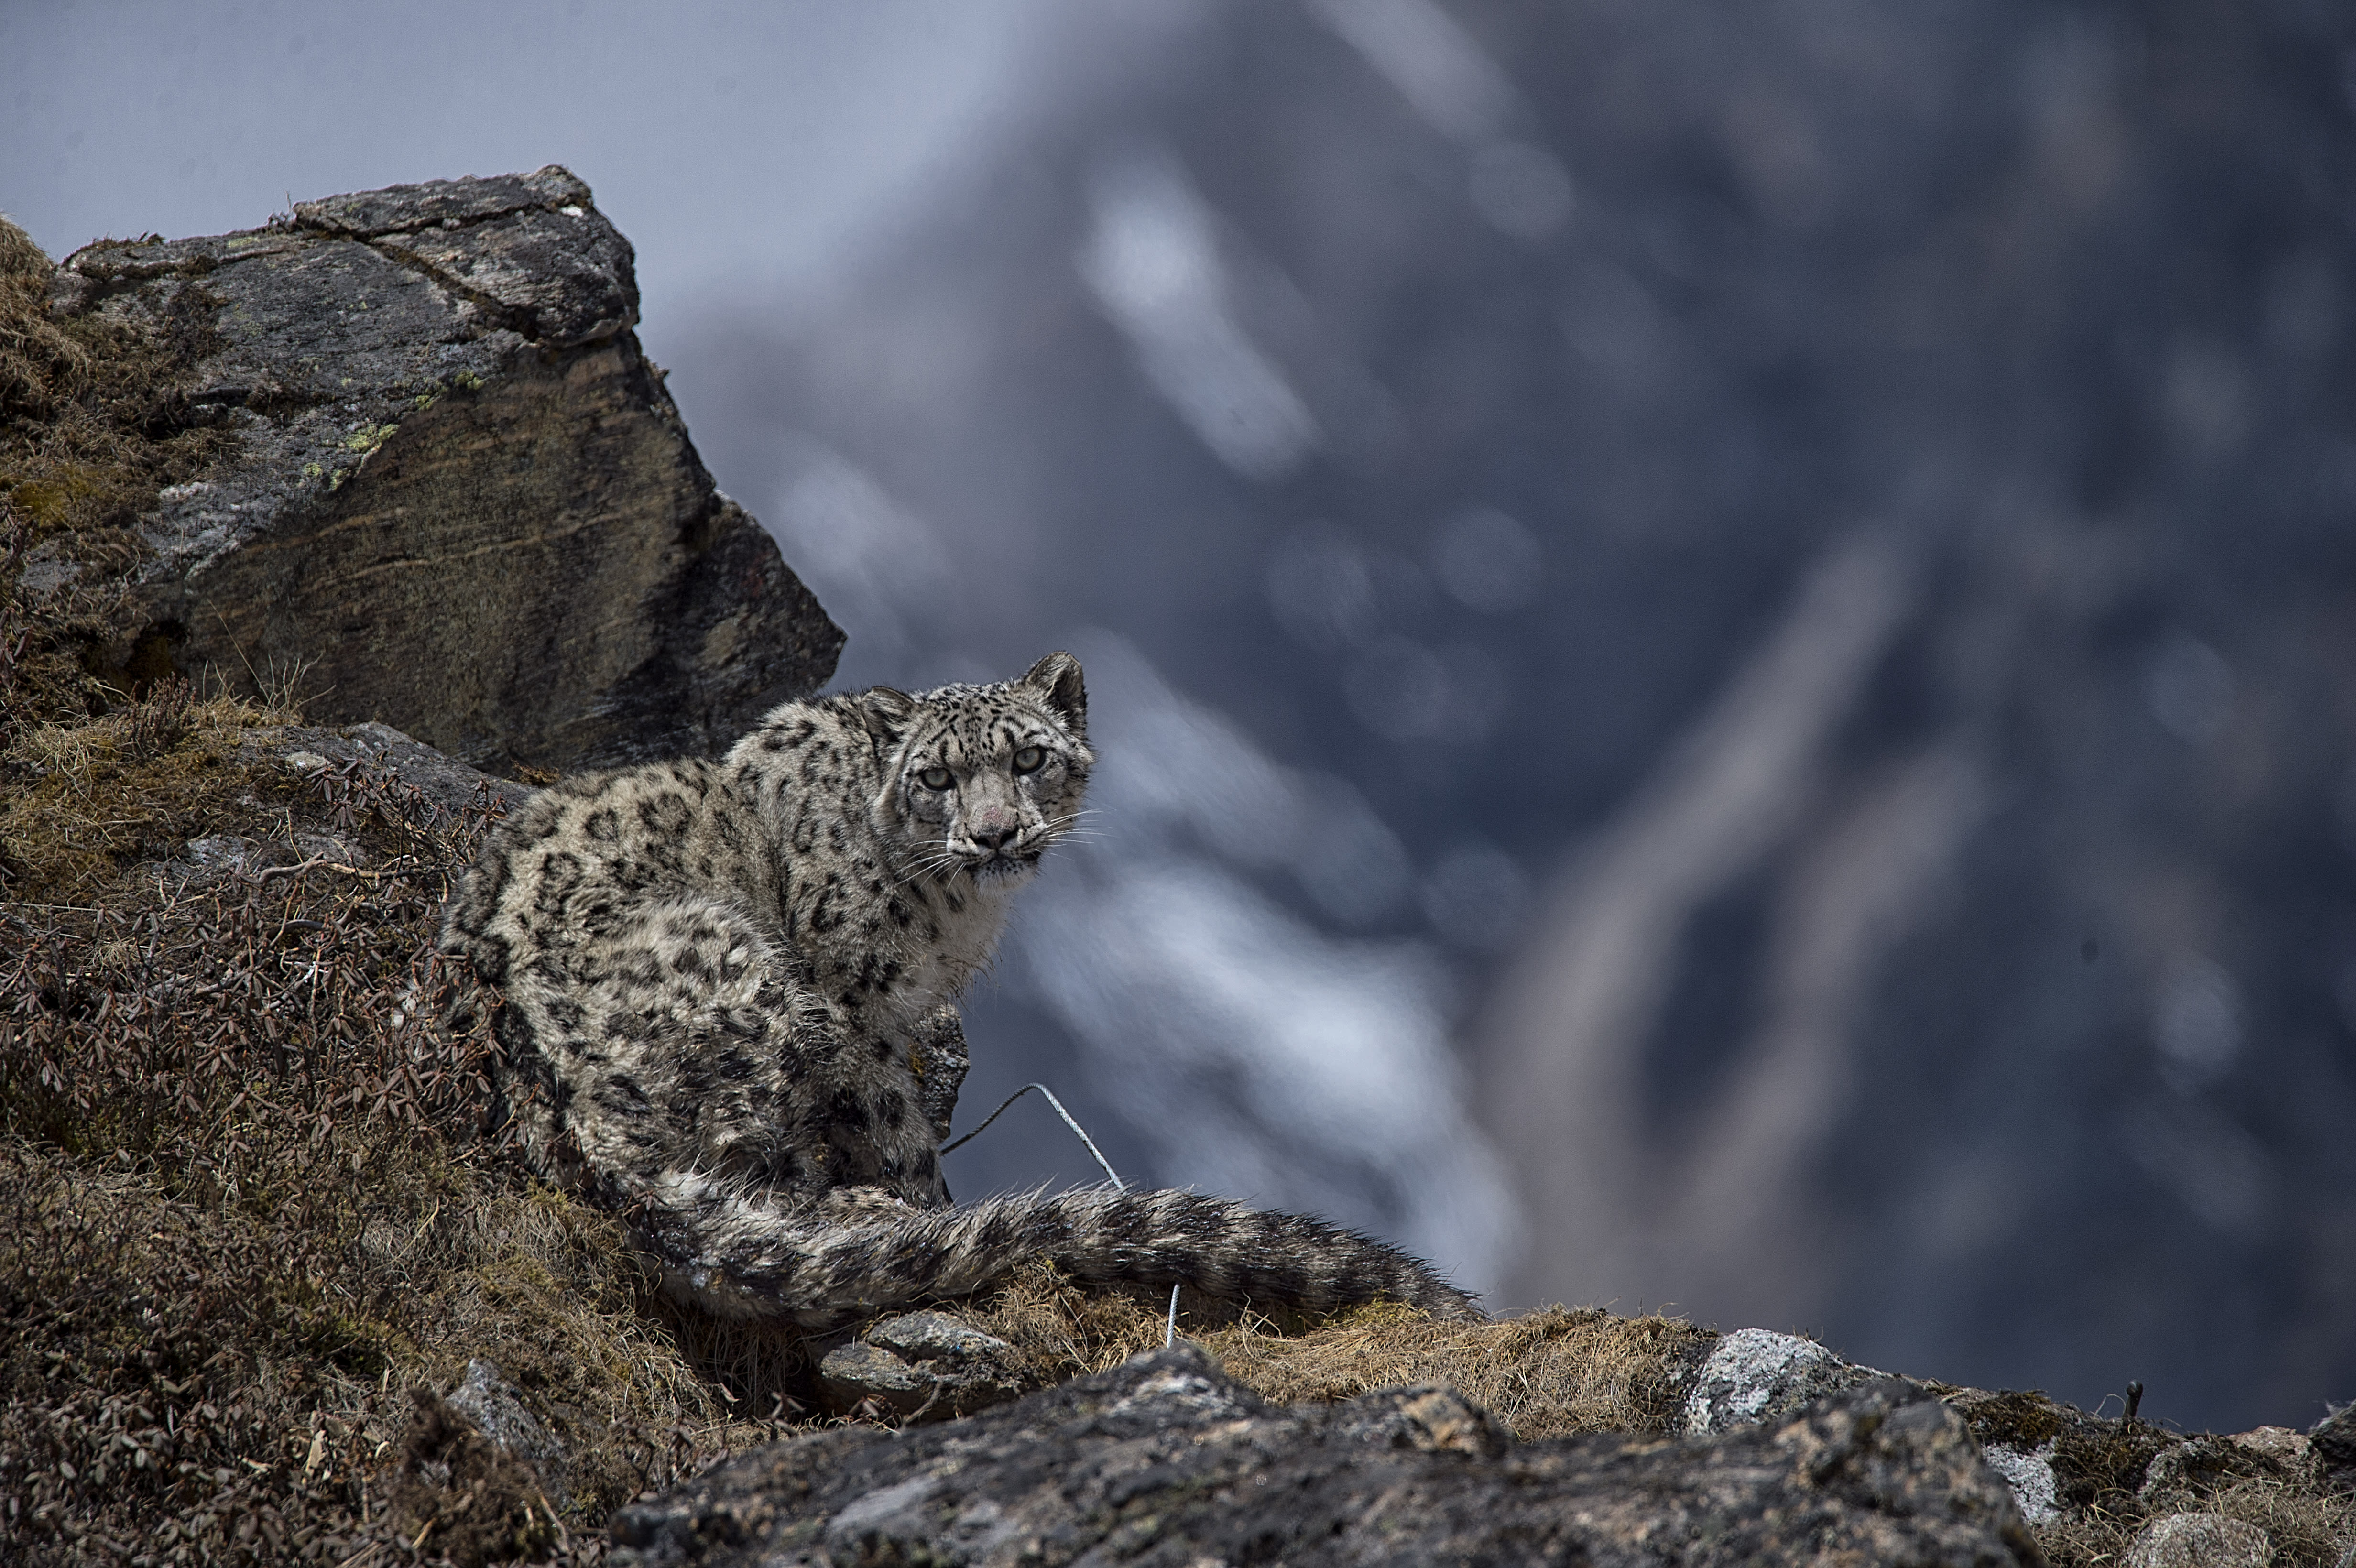 snow leopard standing on hind legs